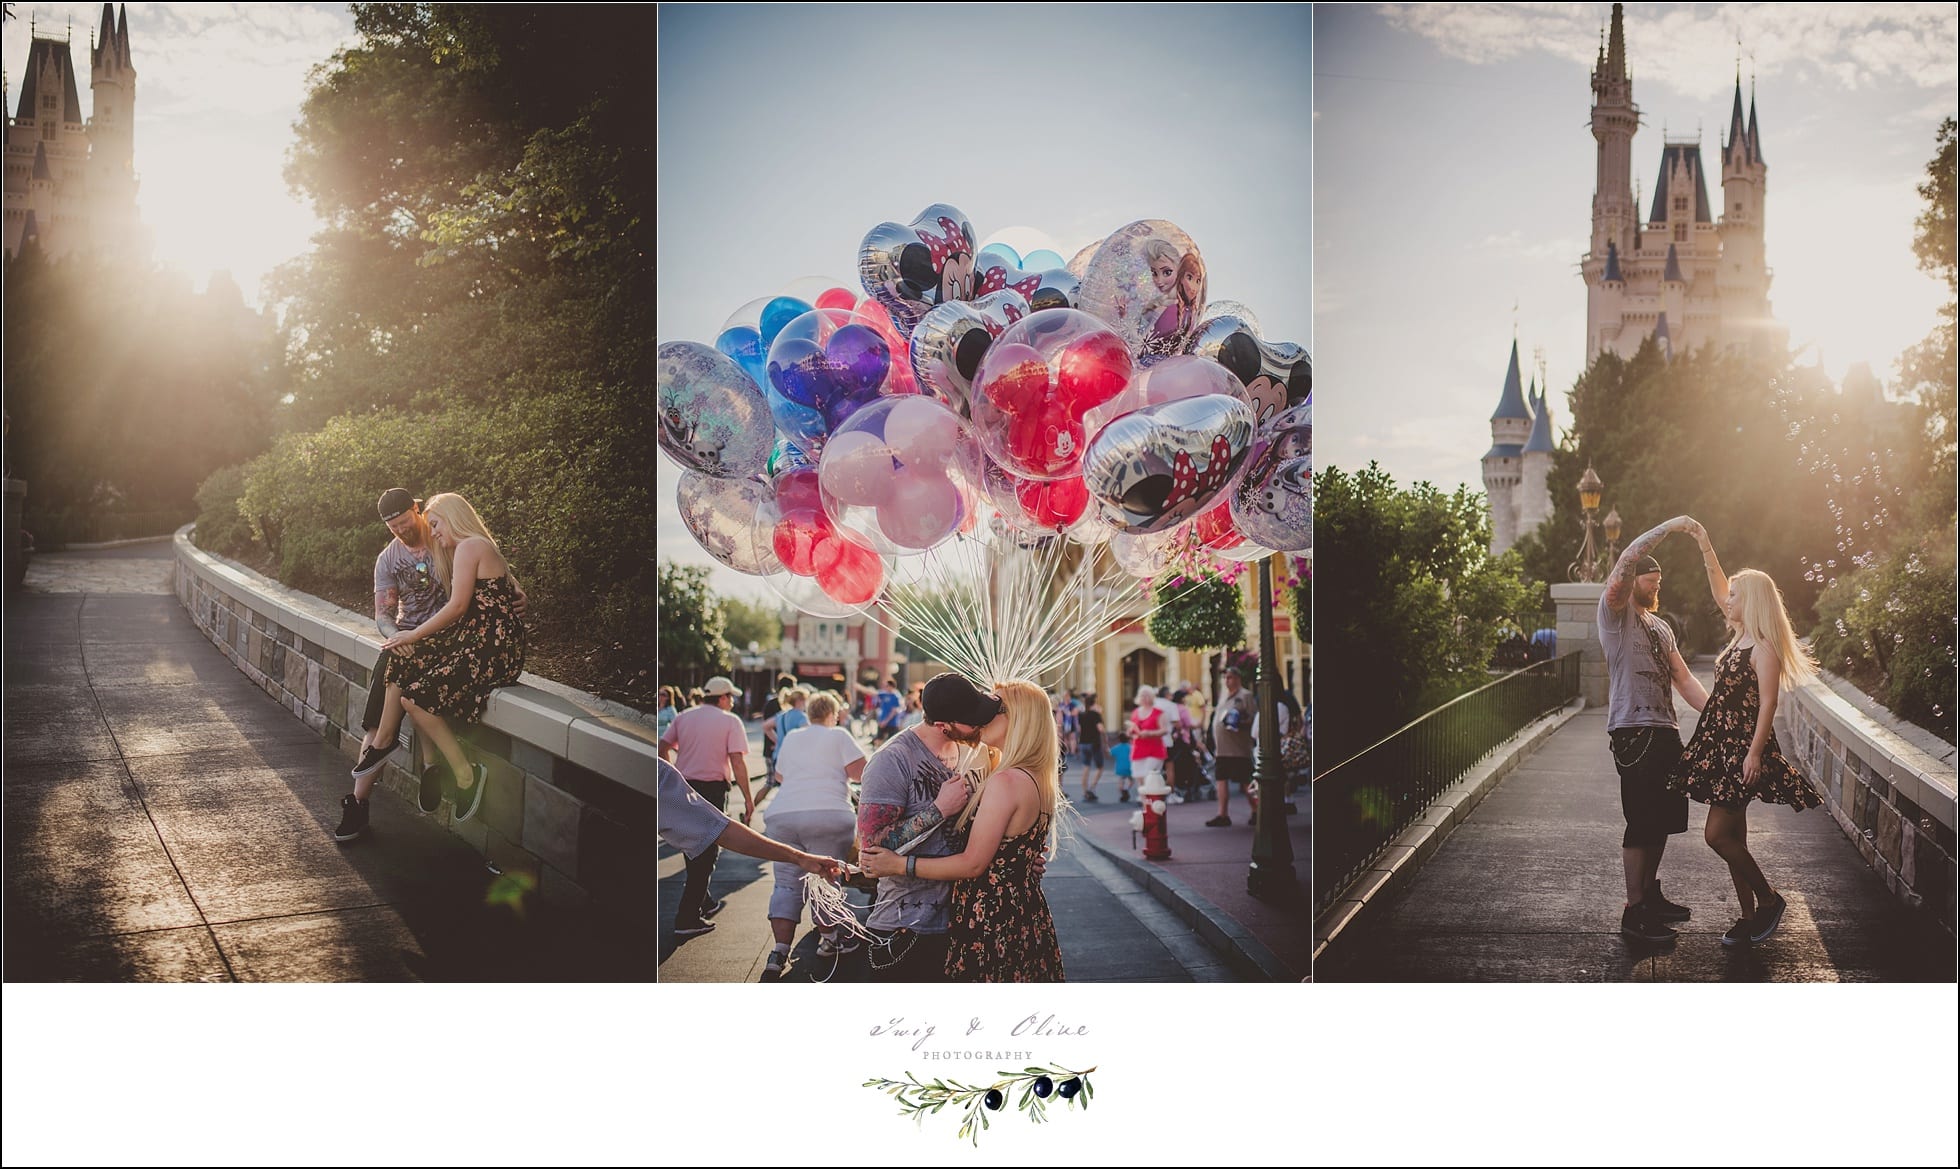 Walt Disney World, Magic Kingdom, Honeymoon session, happiest place on earth, balloons, Mickey Mouse, Walt Disney, Disney, happy couples, Florida Disney backdrop, amazing couples, Twig and Olive photography honeymoon session